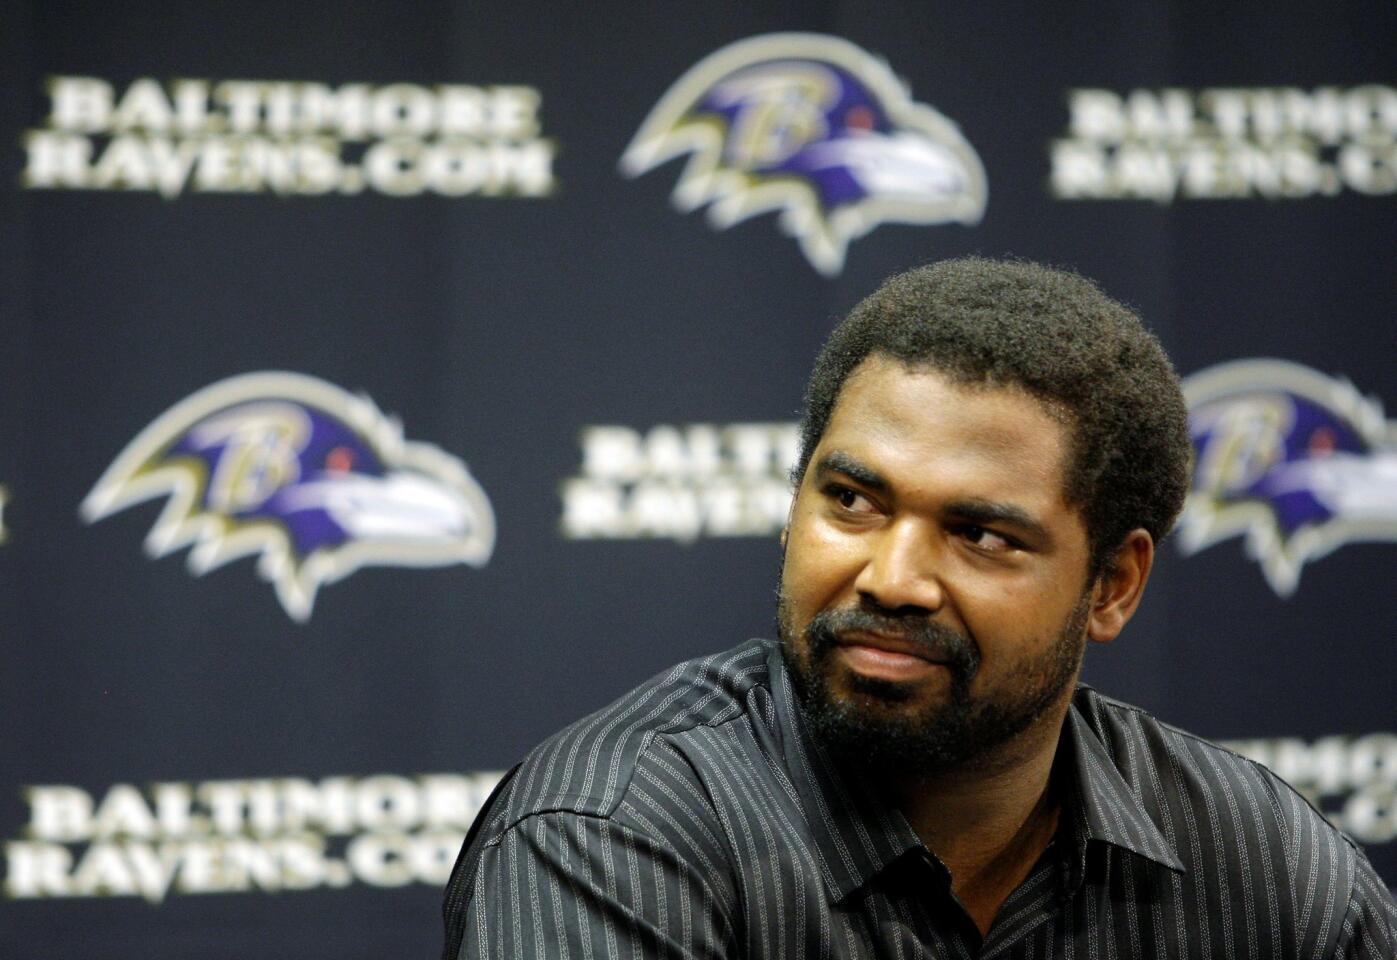 Ravens tackle Jonathan Ogden during a news conference in which he announced his retirement.